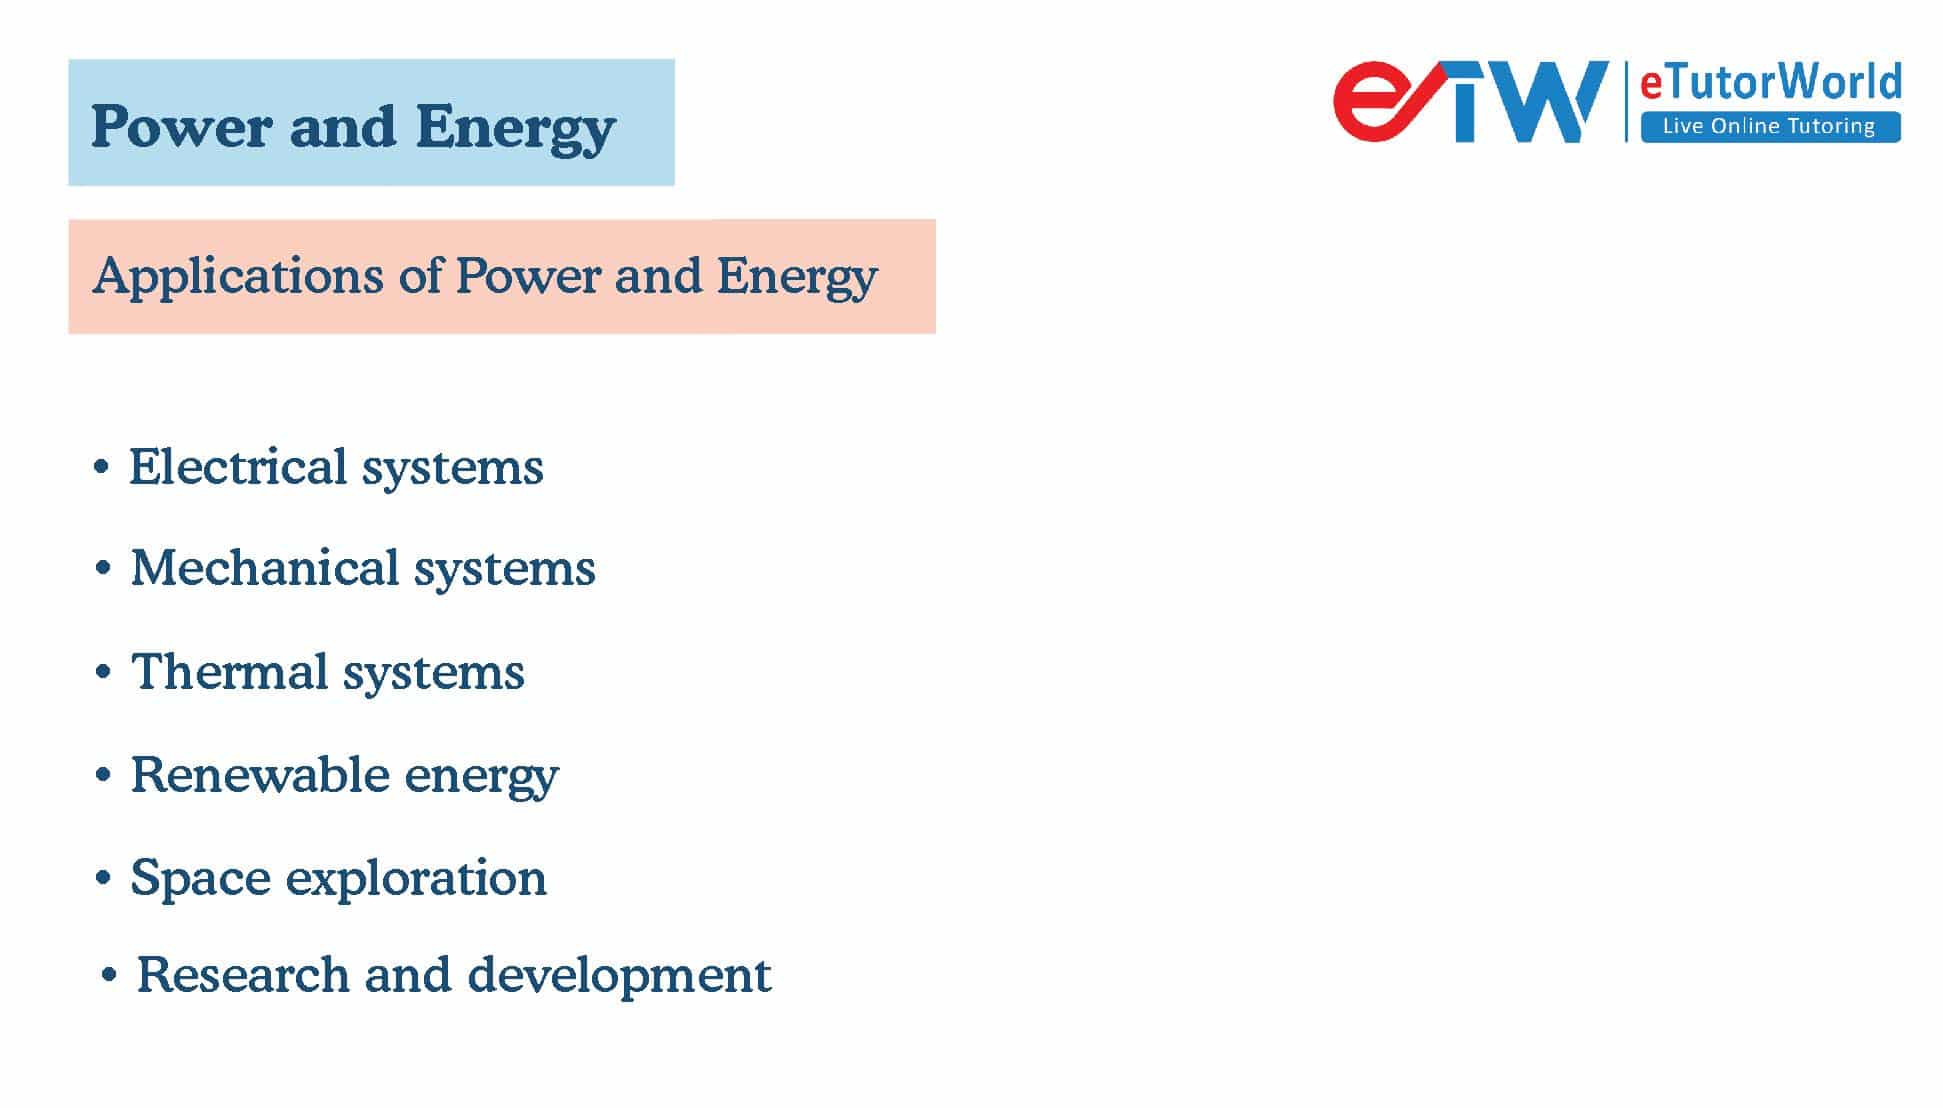 Applications of power and energy